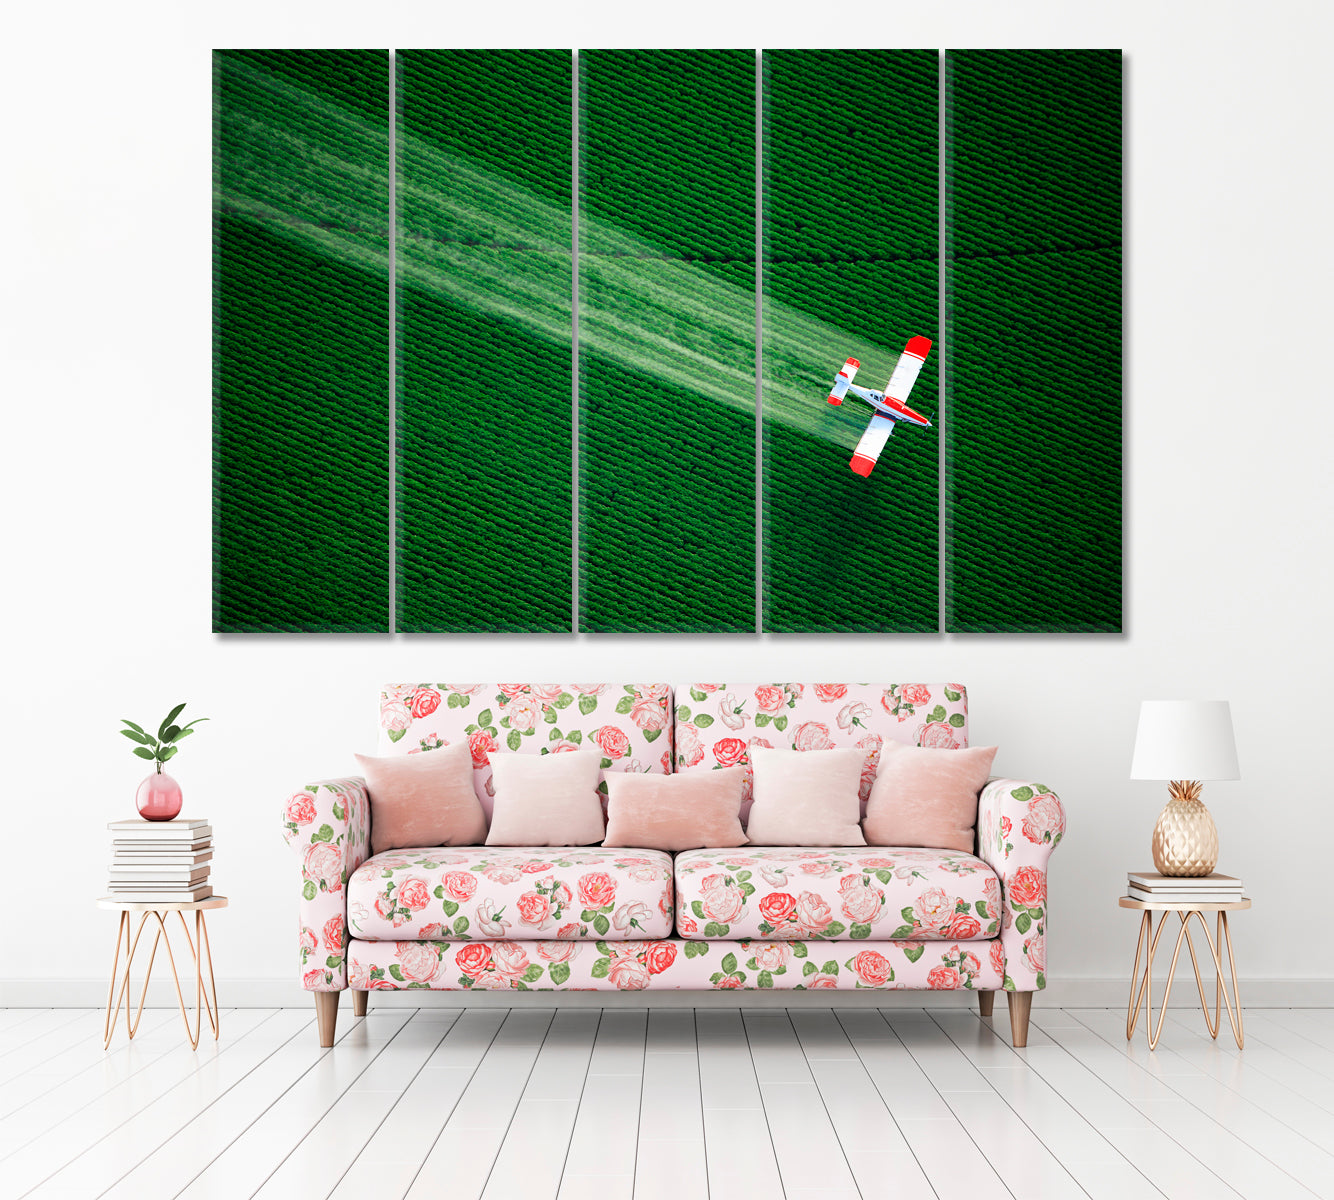 Agricultural Plane over Green Fields in Idaho Canvas Print ArtLexy 5 Panels 36"x24" inches 